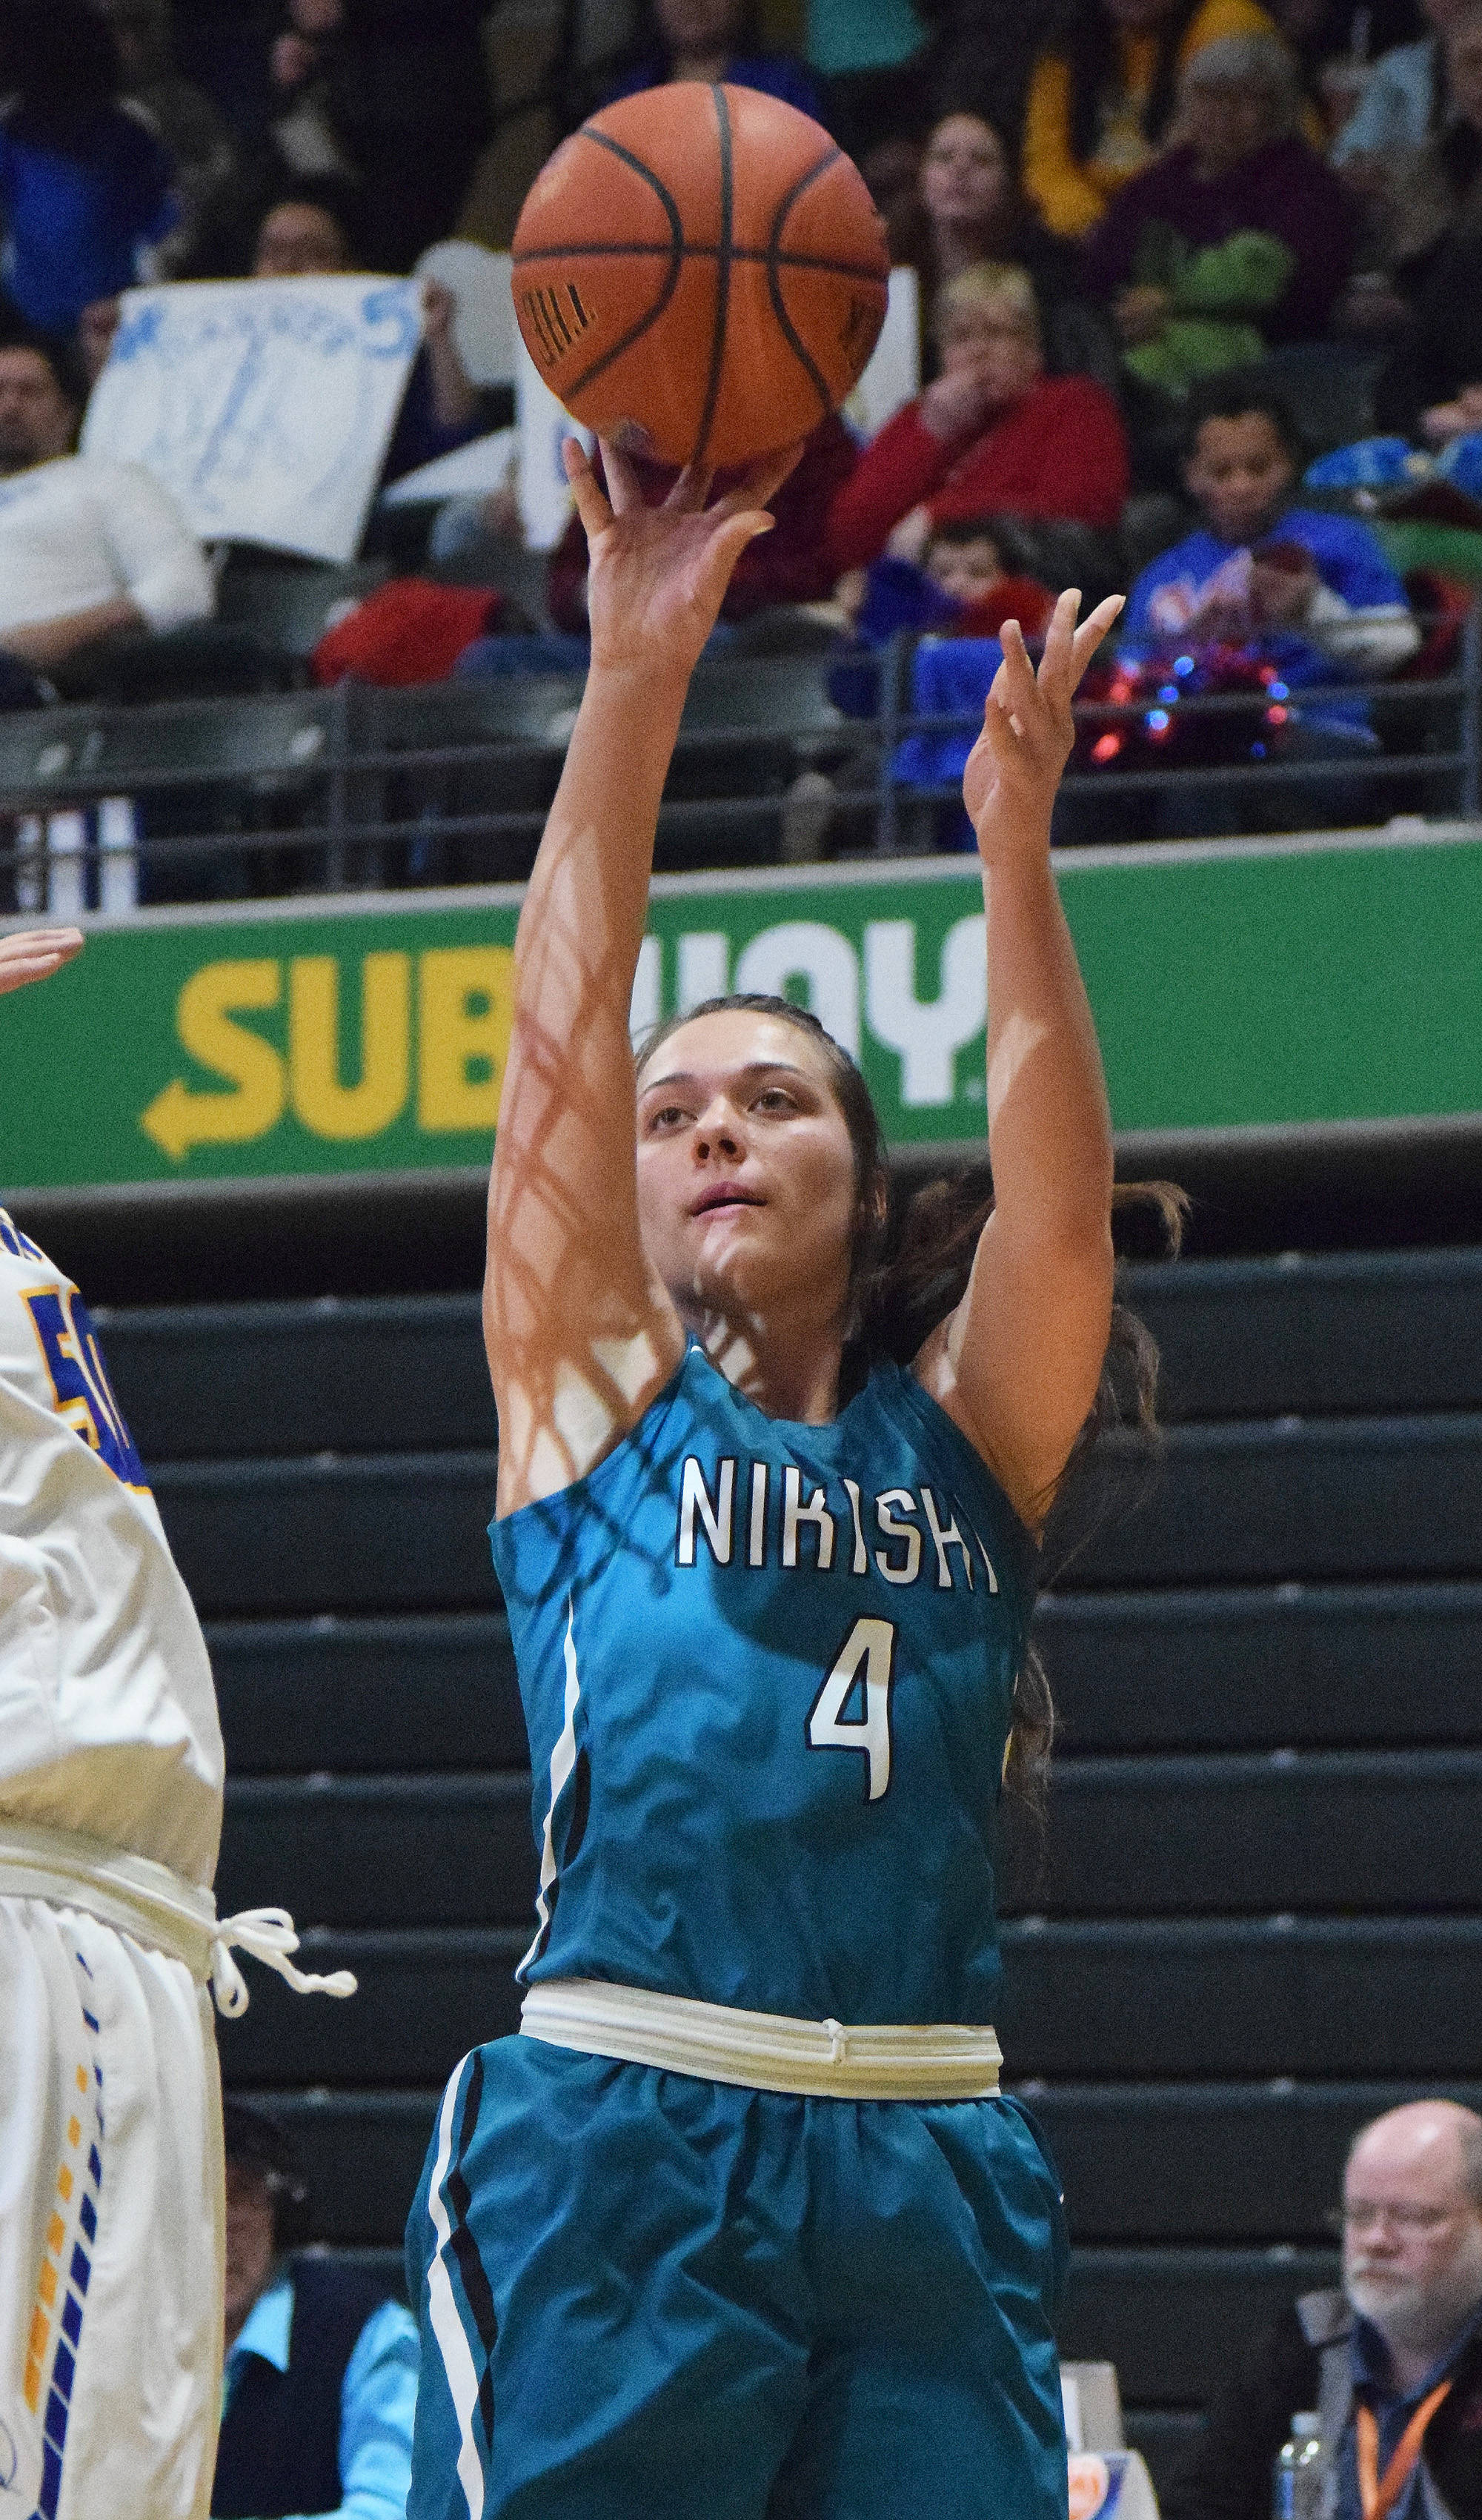 Nikiski’s Emma Wik unleashes a jumpshot over the Barrow Whalers, Thursday evening at the Class 3A state tournament at the Alaska Airlines Center. (Photo by Joey Klecka/Peninsula Clarion)